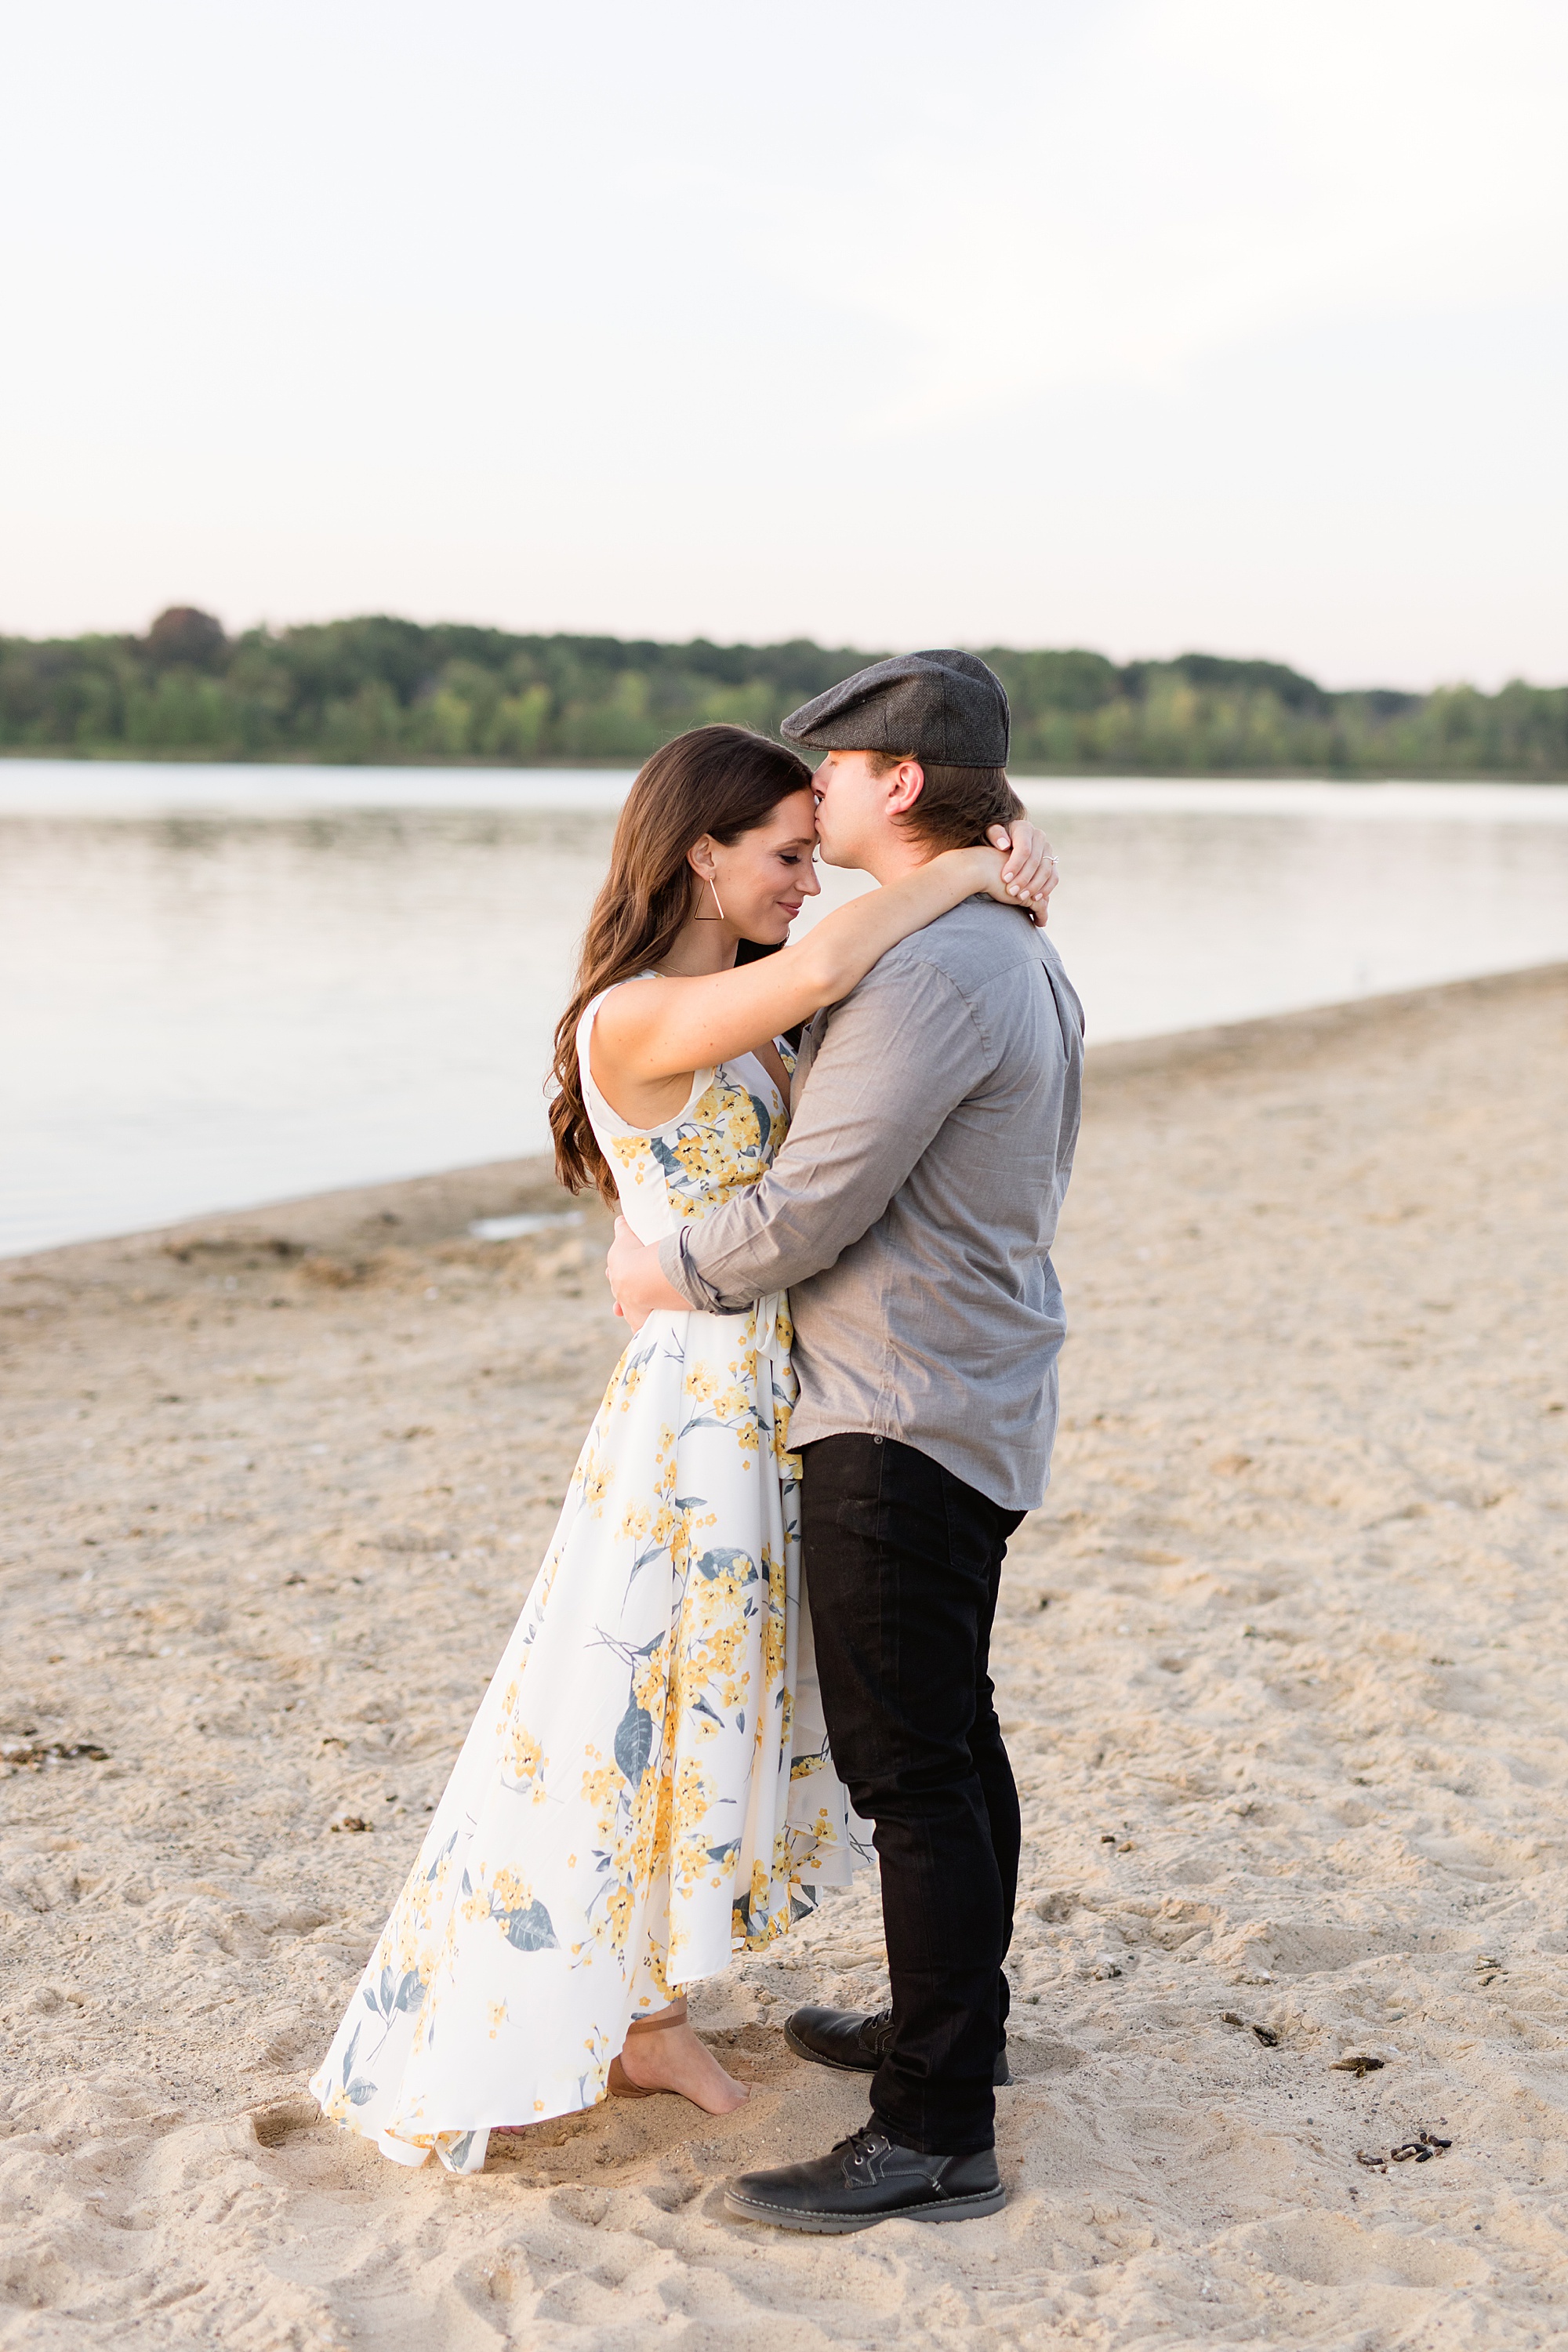 A romantic golden hour engagement at Stony Creek filled with champagne and sand by Breanne Rochelle Photography.